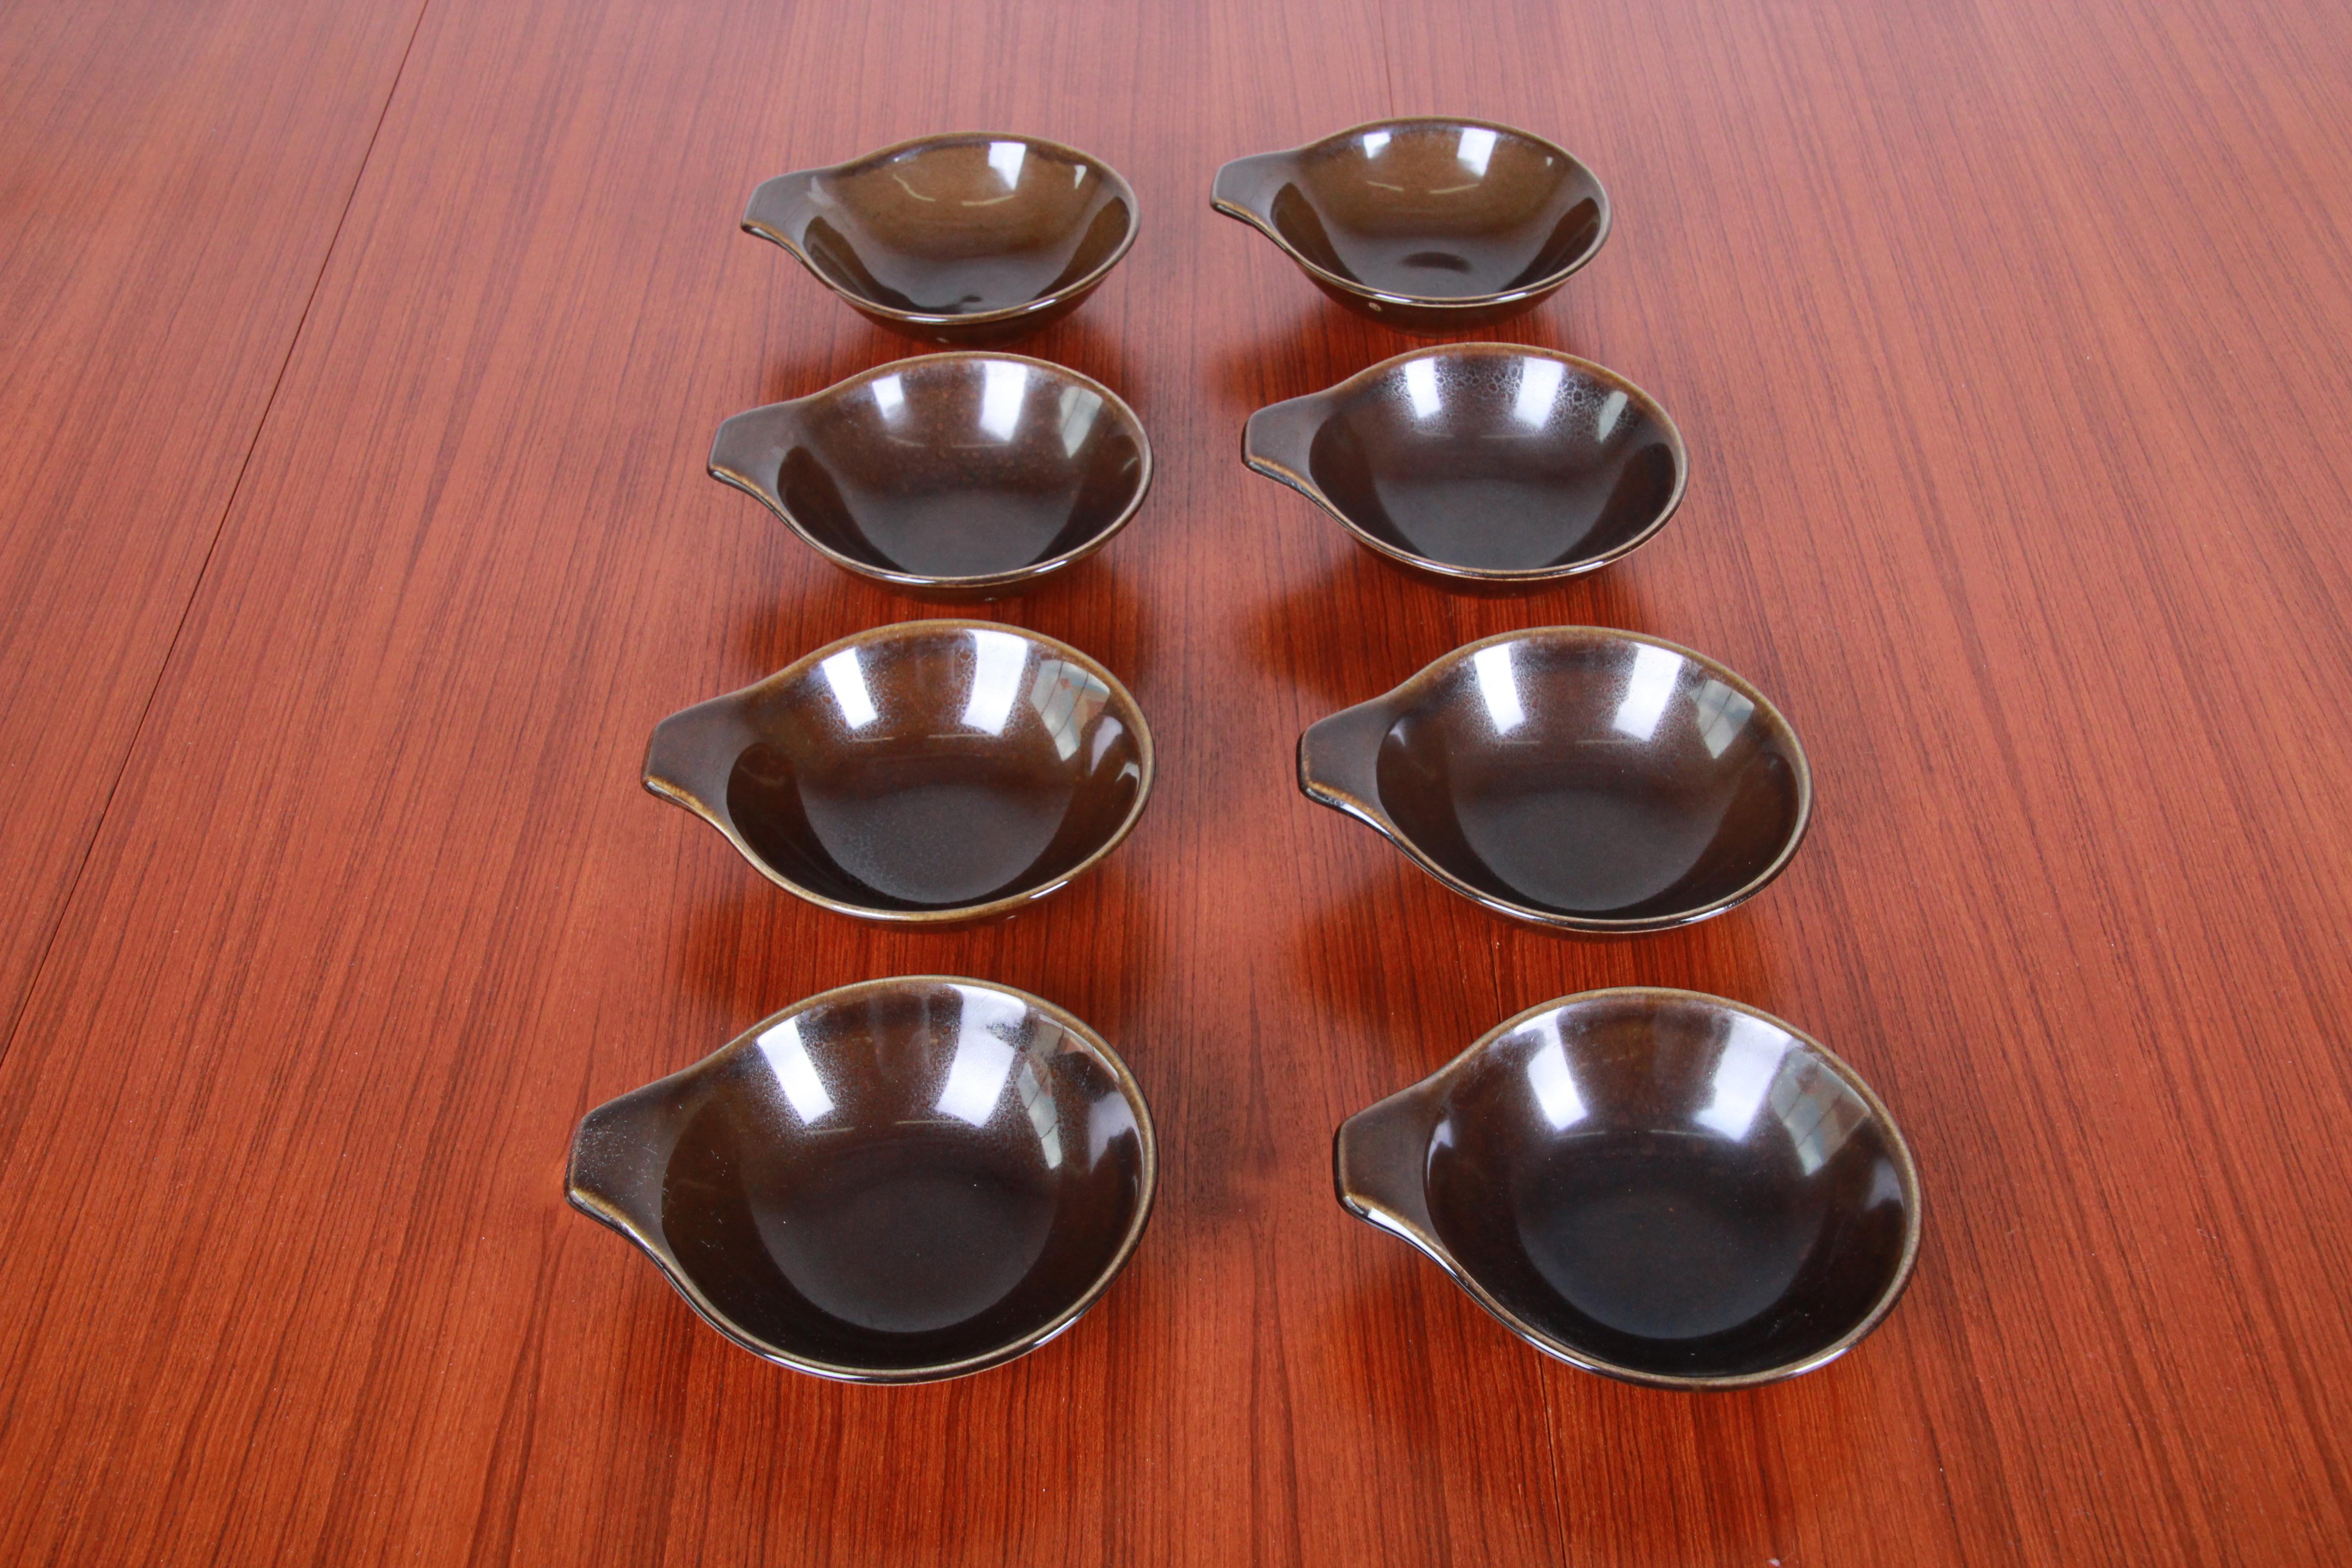 A rare set of 1940s American modern dinnerware designed by Russel Wright for Steubenville Pottery. This set is in the classic glazed brown color. Included is the following: (1) 13.5